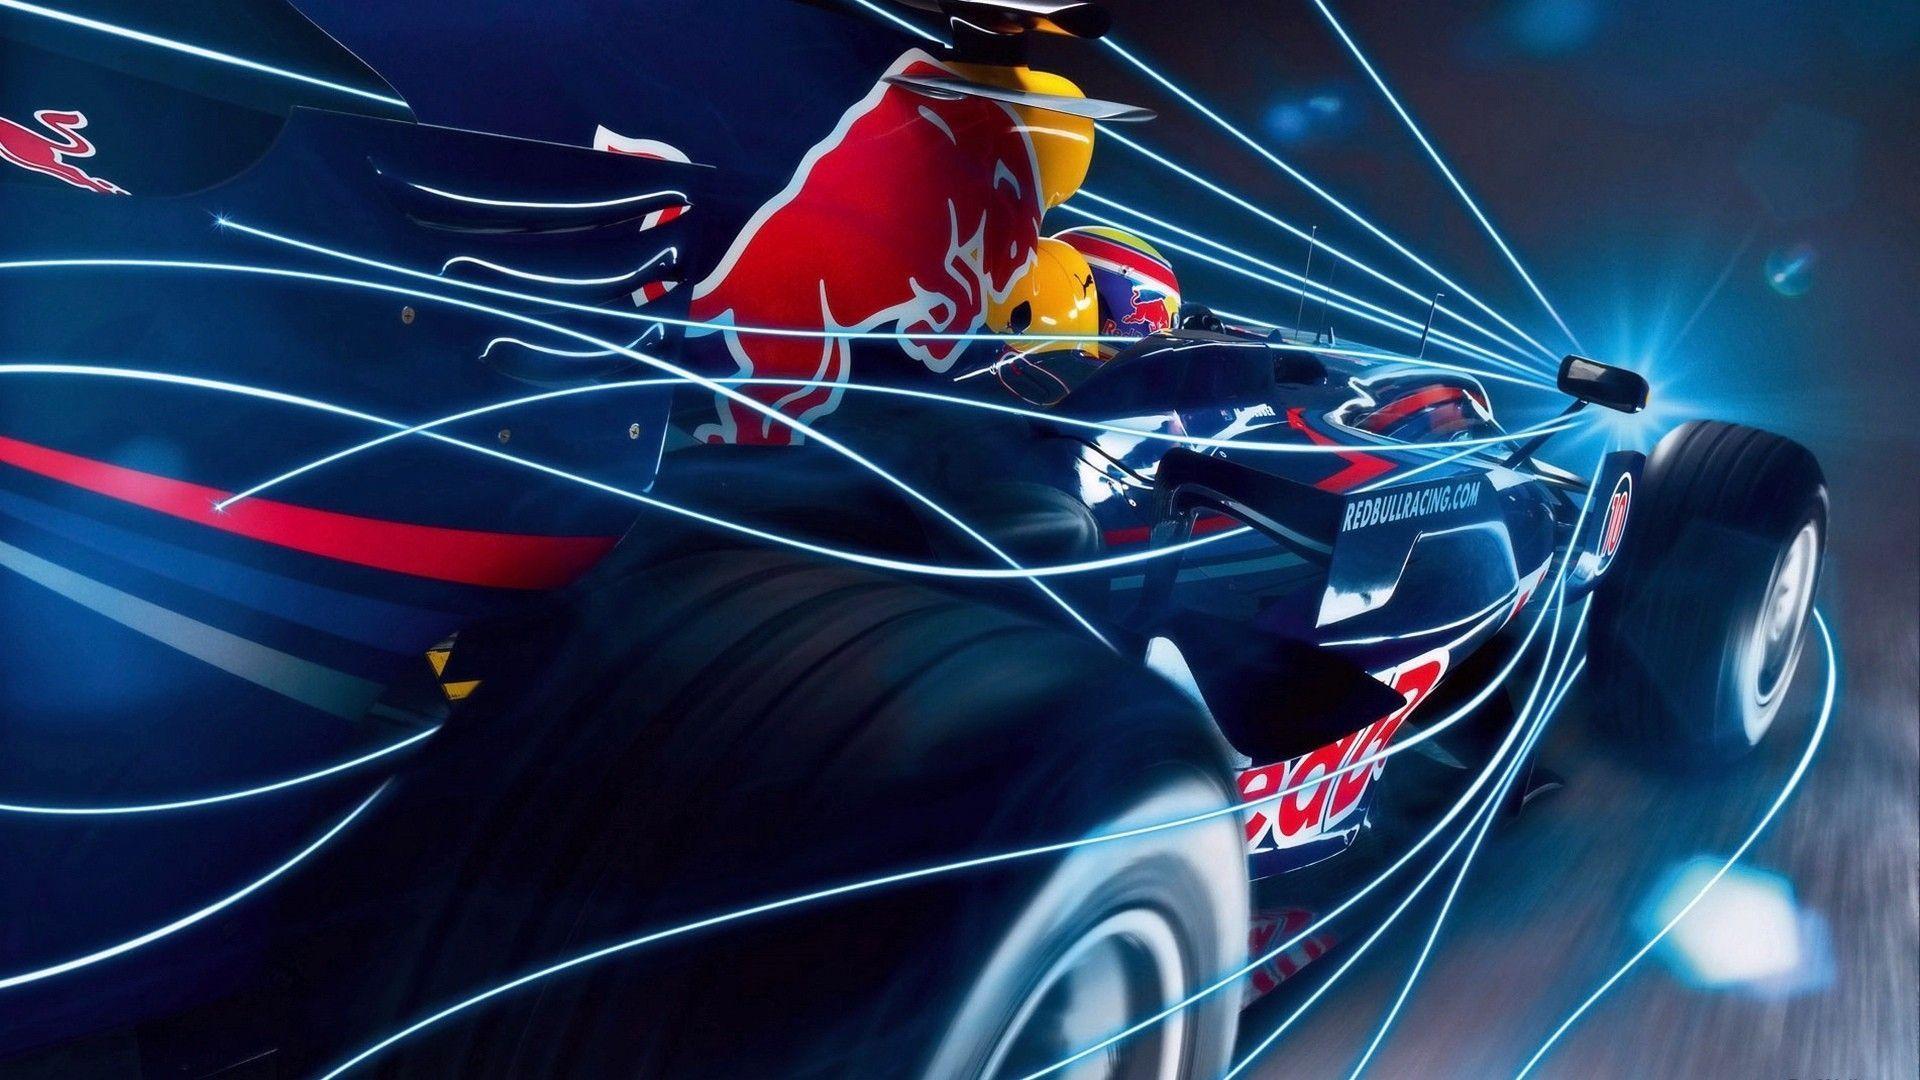 image For > F1 Cars Wallpaper HD